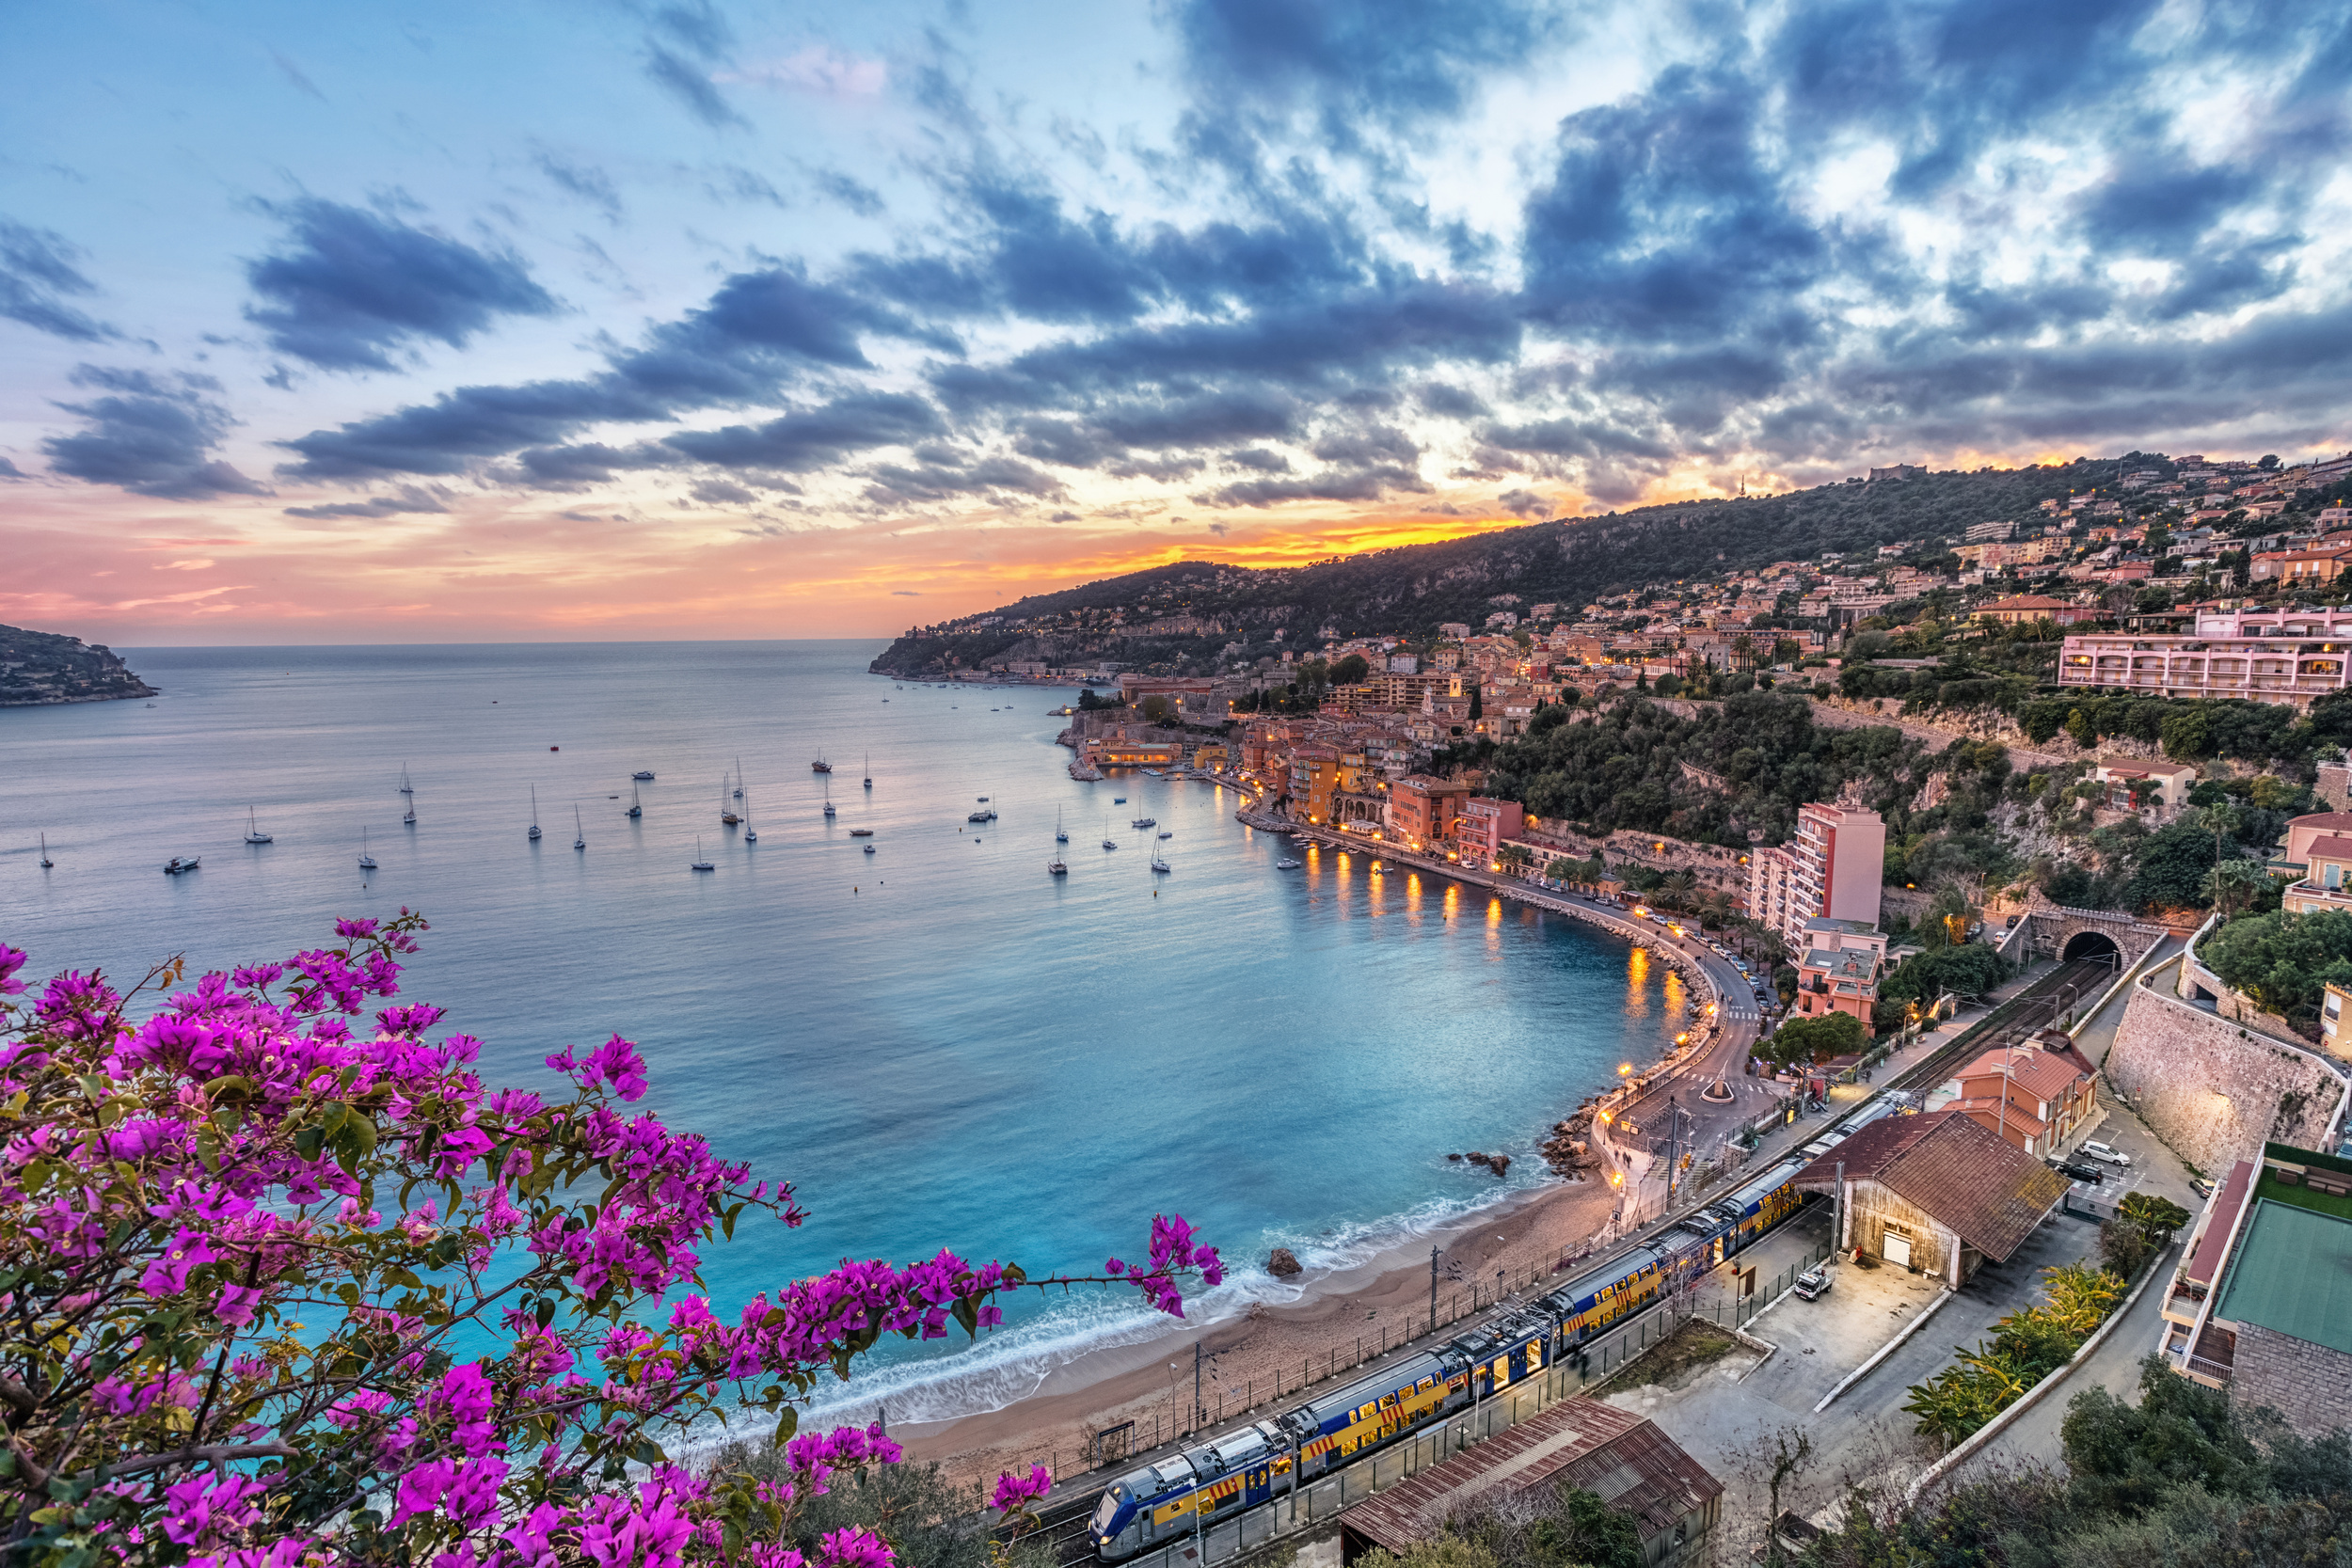 <p>The Cote d’Azur was legendary long before <em>Emily in Paris</em> visited the coast. And while cruising around in a convertible might be stylish, it’s not exactly realistic for most visitors. Plus, one of the best ways to see the South of France is by a regional RER train. Sure, it’s not the super quick TGV, but that just means you’ll see more of the lovely area. There are multiple lines, and most tickets can be bought on the day of travel.</p><p><a href='https://www.msn.com/en-us/community/channel/vid-cj9pqbr0vn9in2b6ddcd8sfgpfq6x6utp44fssrv6mc2gtybw0us'>Follow us on MSN to see more of our exclusive lifestyle content.</a></p>